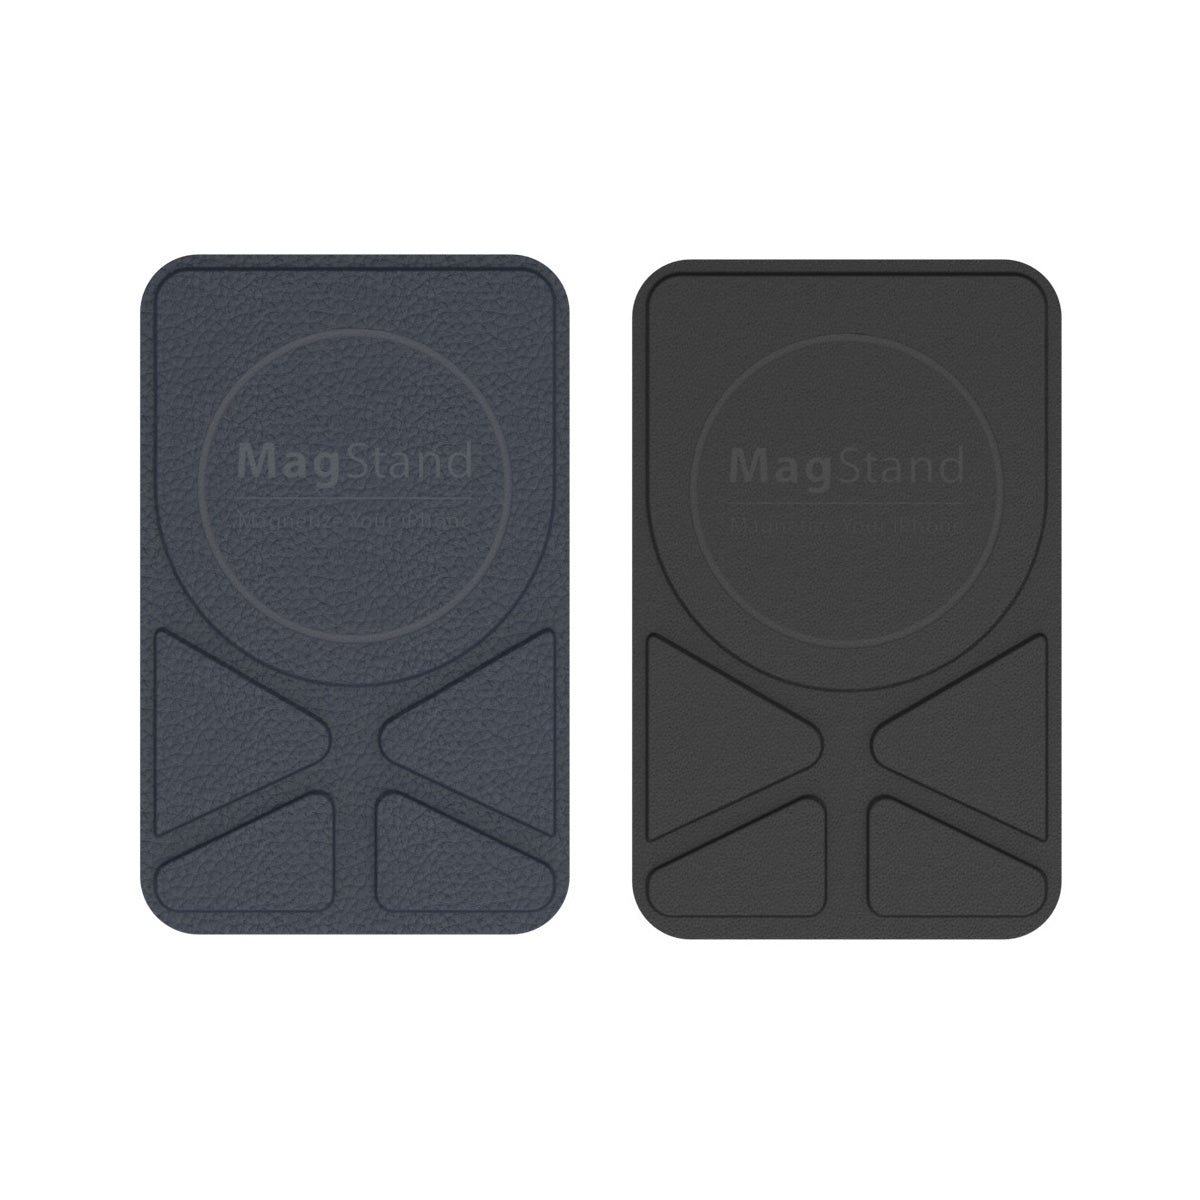 SwitchEasy MagStand Magnetic Adhesive Stand